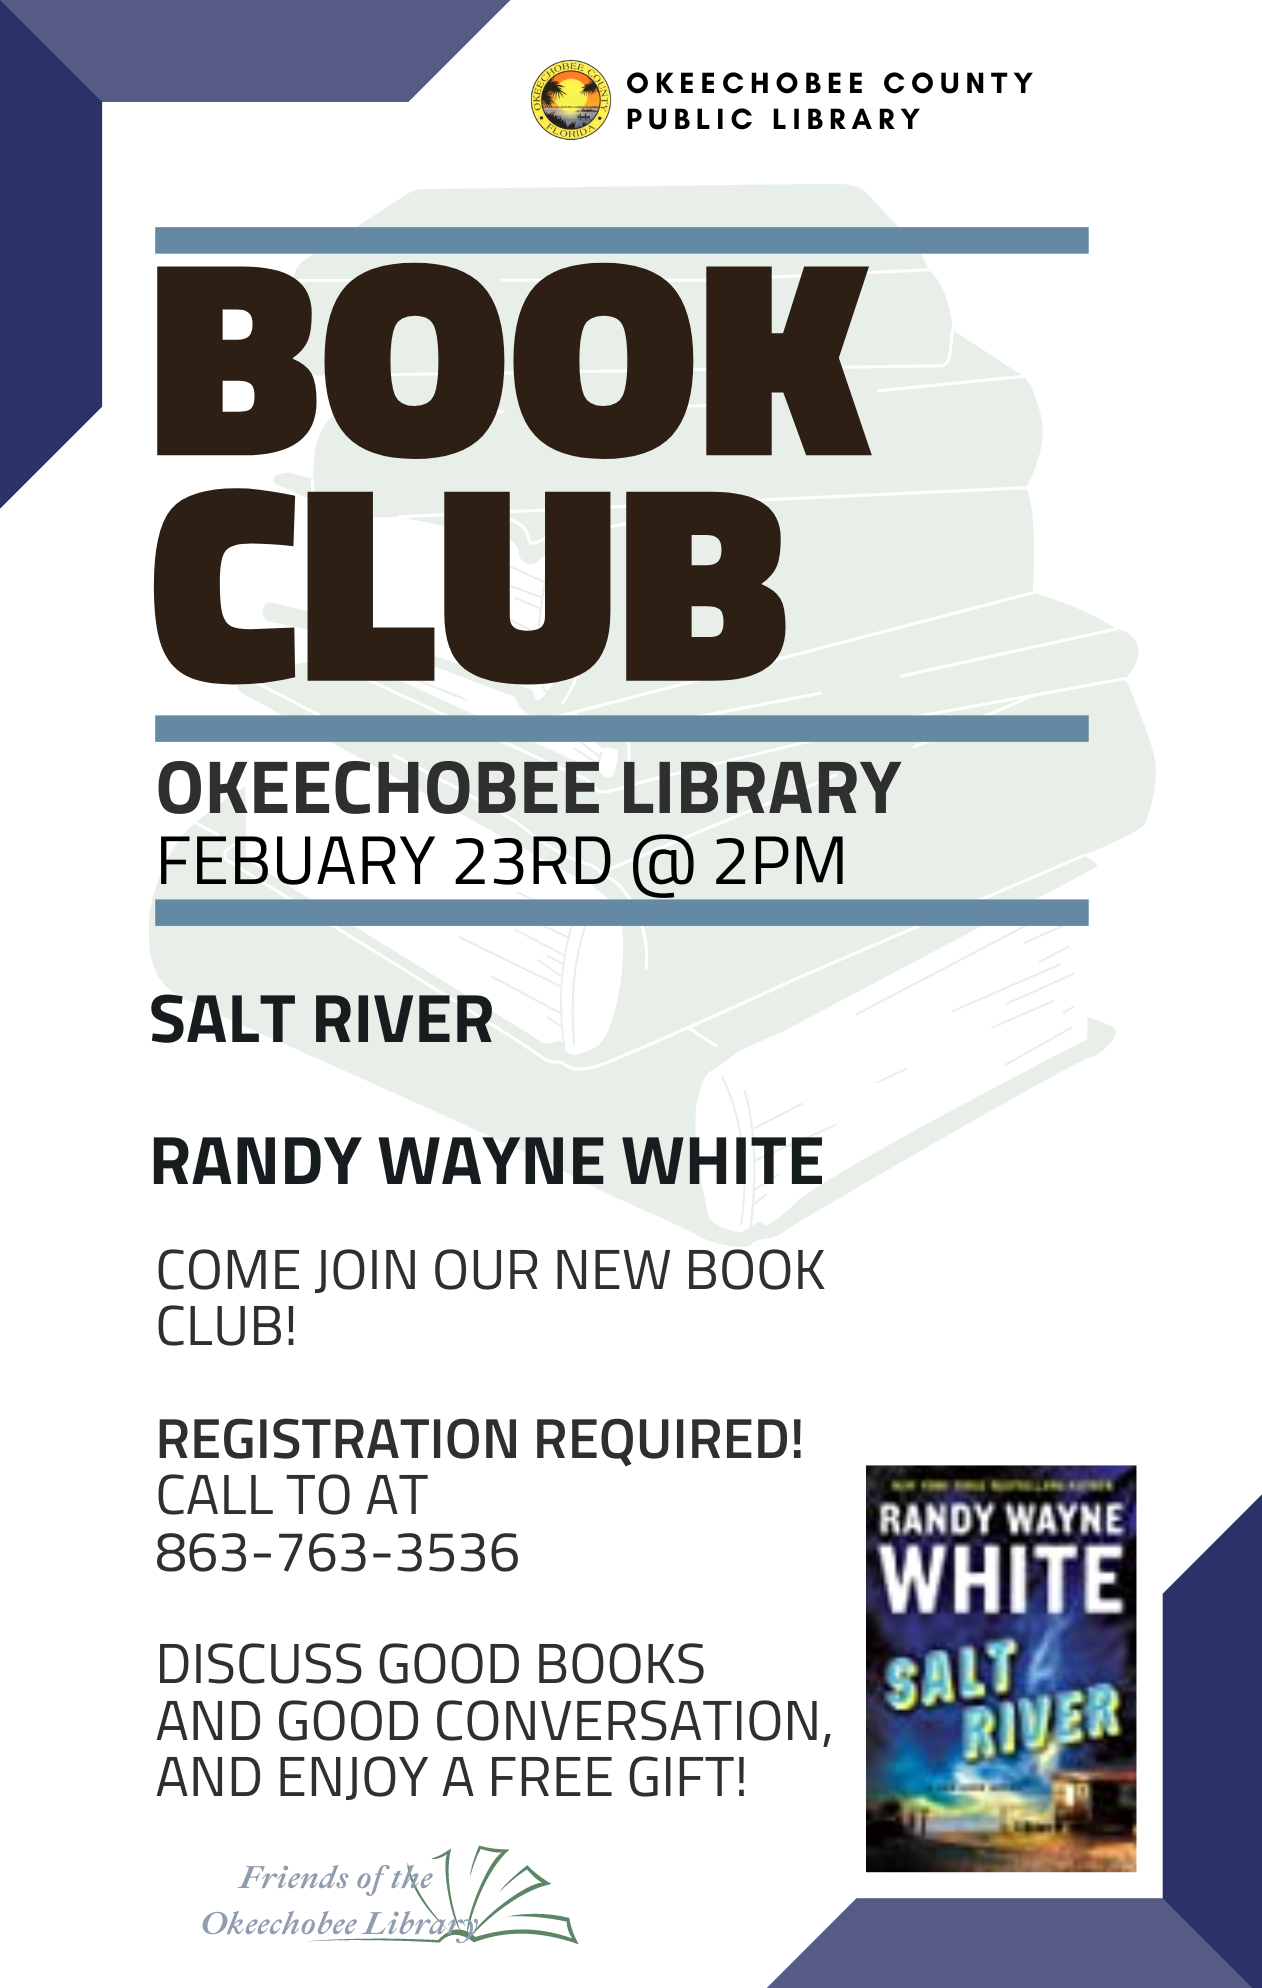 Join us at the Okeechobee Library on Thursday, February 23rd at 2pm for Book Club! This month we will be discussing 'Salt River' by Randy Wayne White. Also every month we have a small FREE gift bag for attendees!